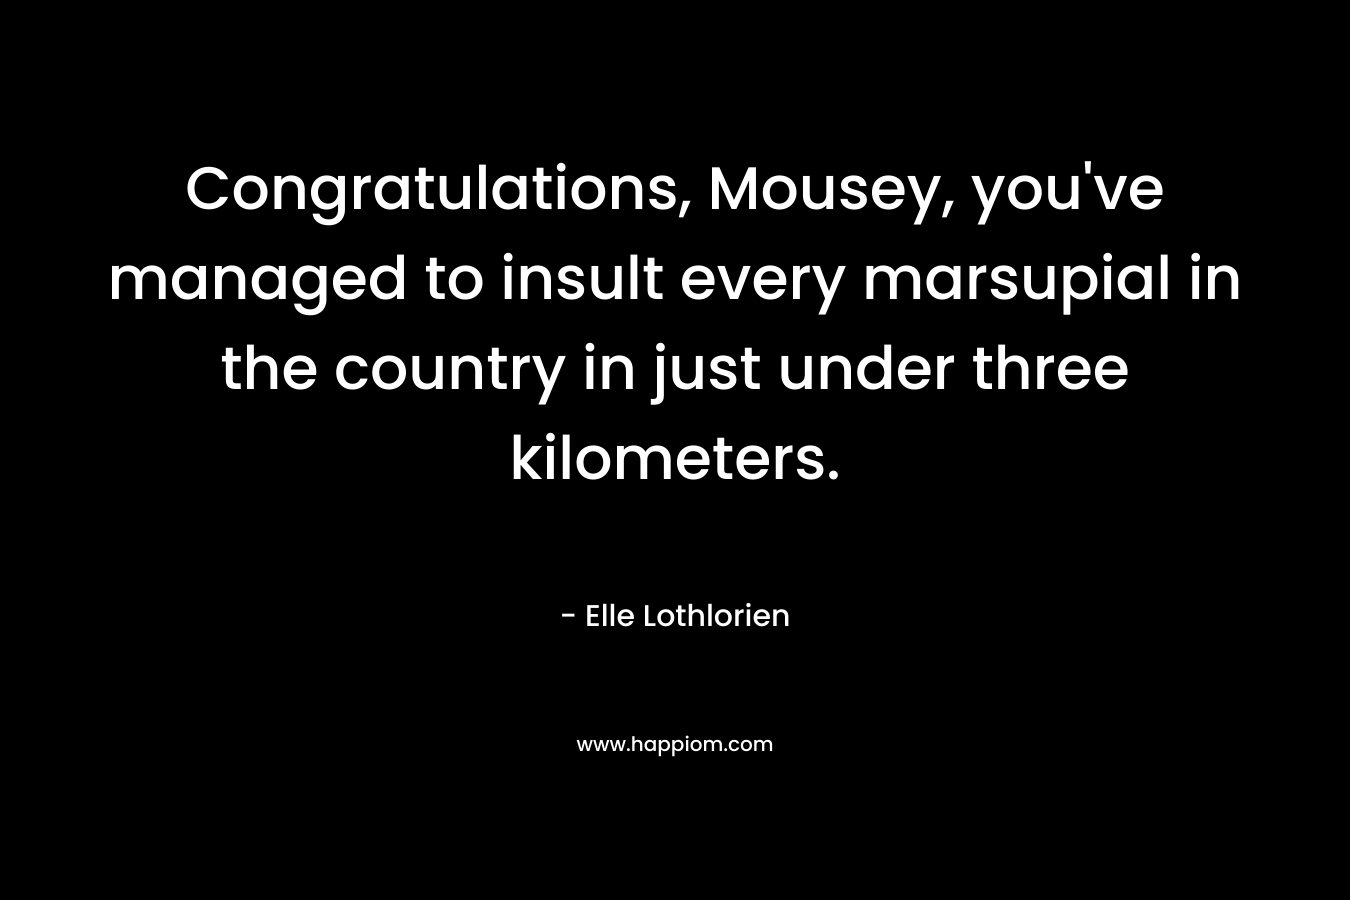 Congratulations, Mousey, you’ve managed to insult every marsupial in the country in just under three kilometers. – Elle Lothlorien